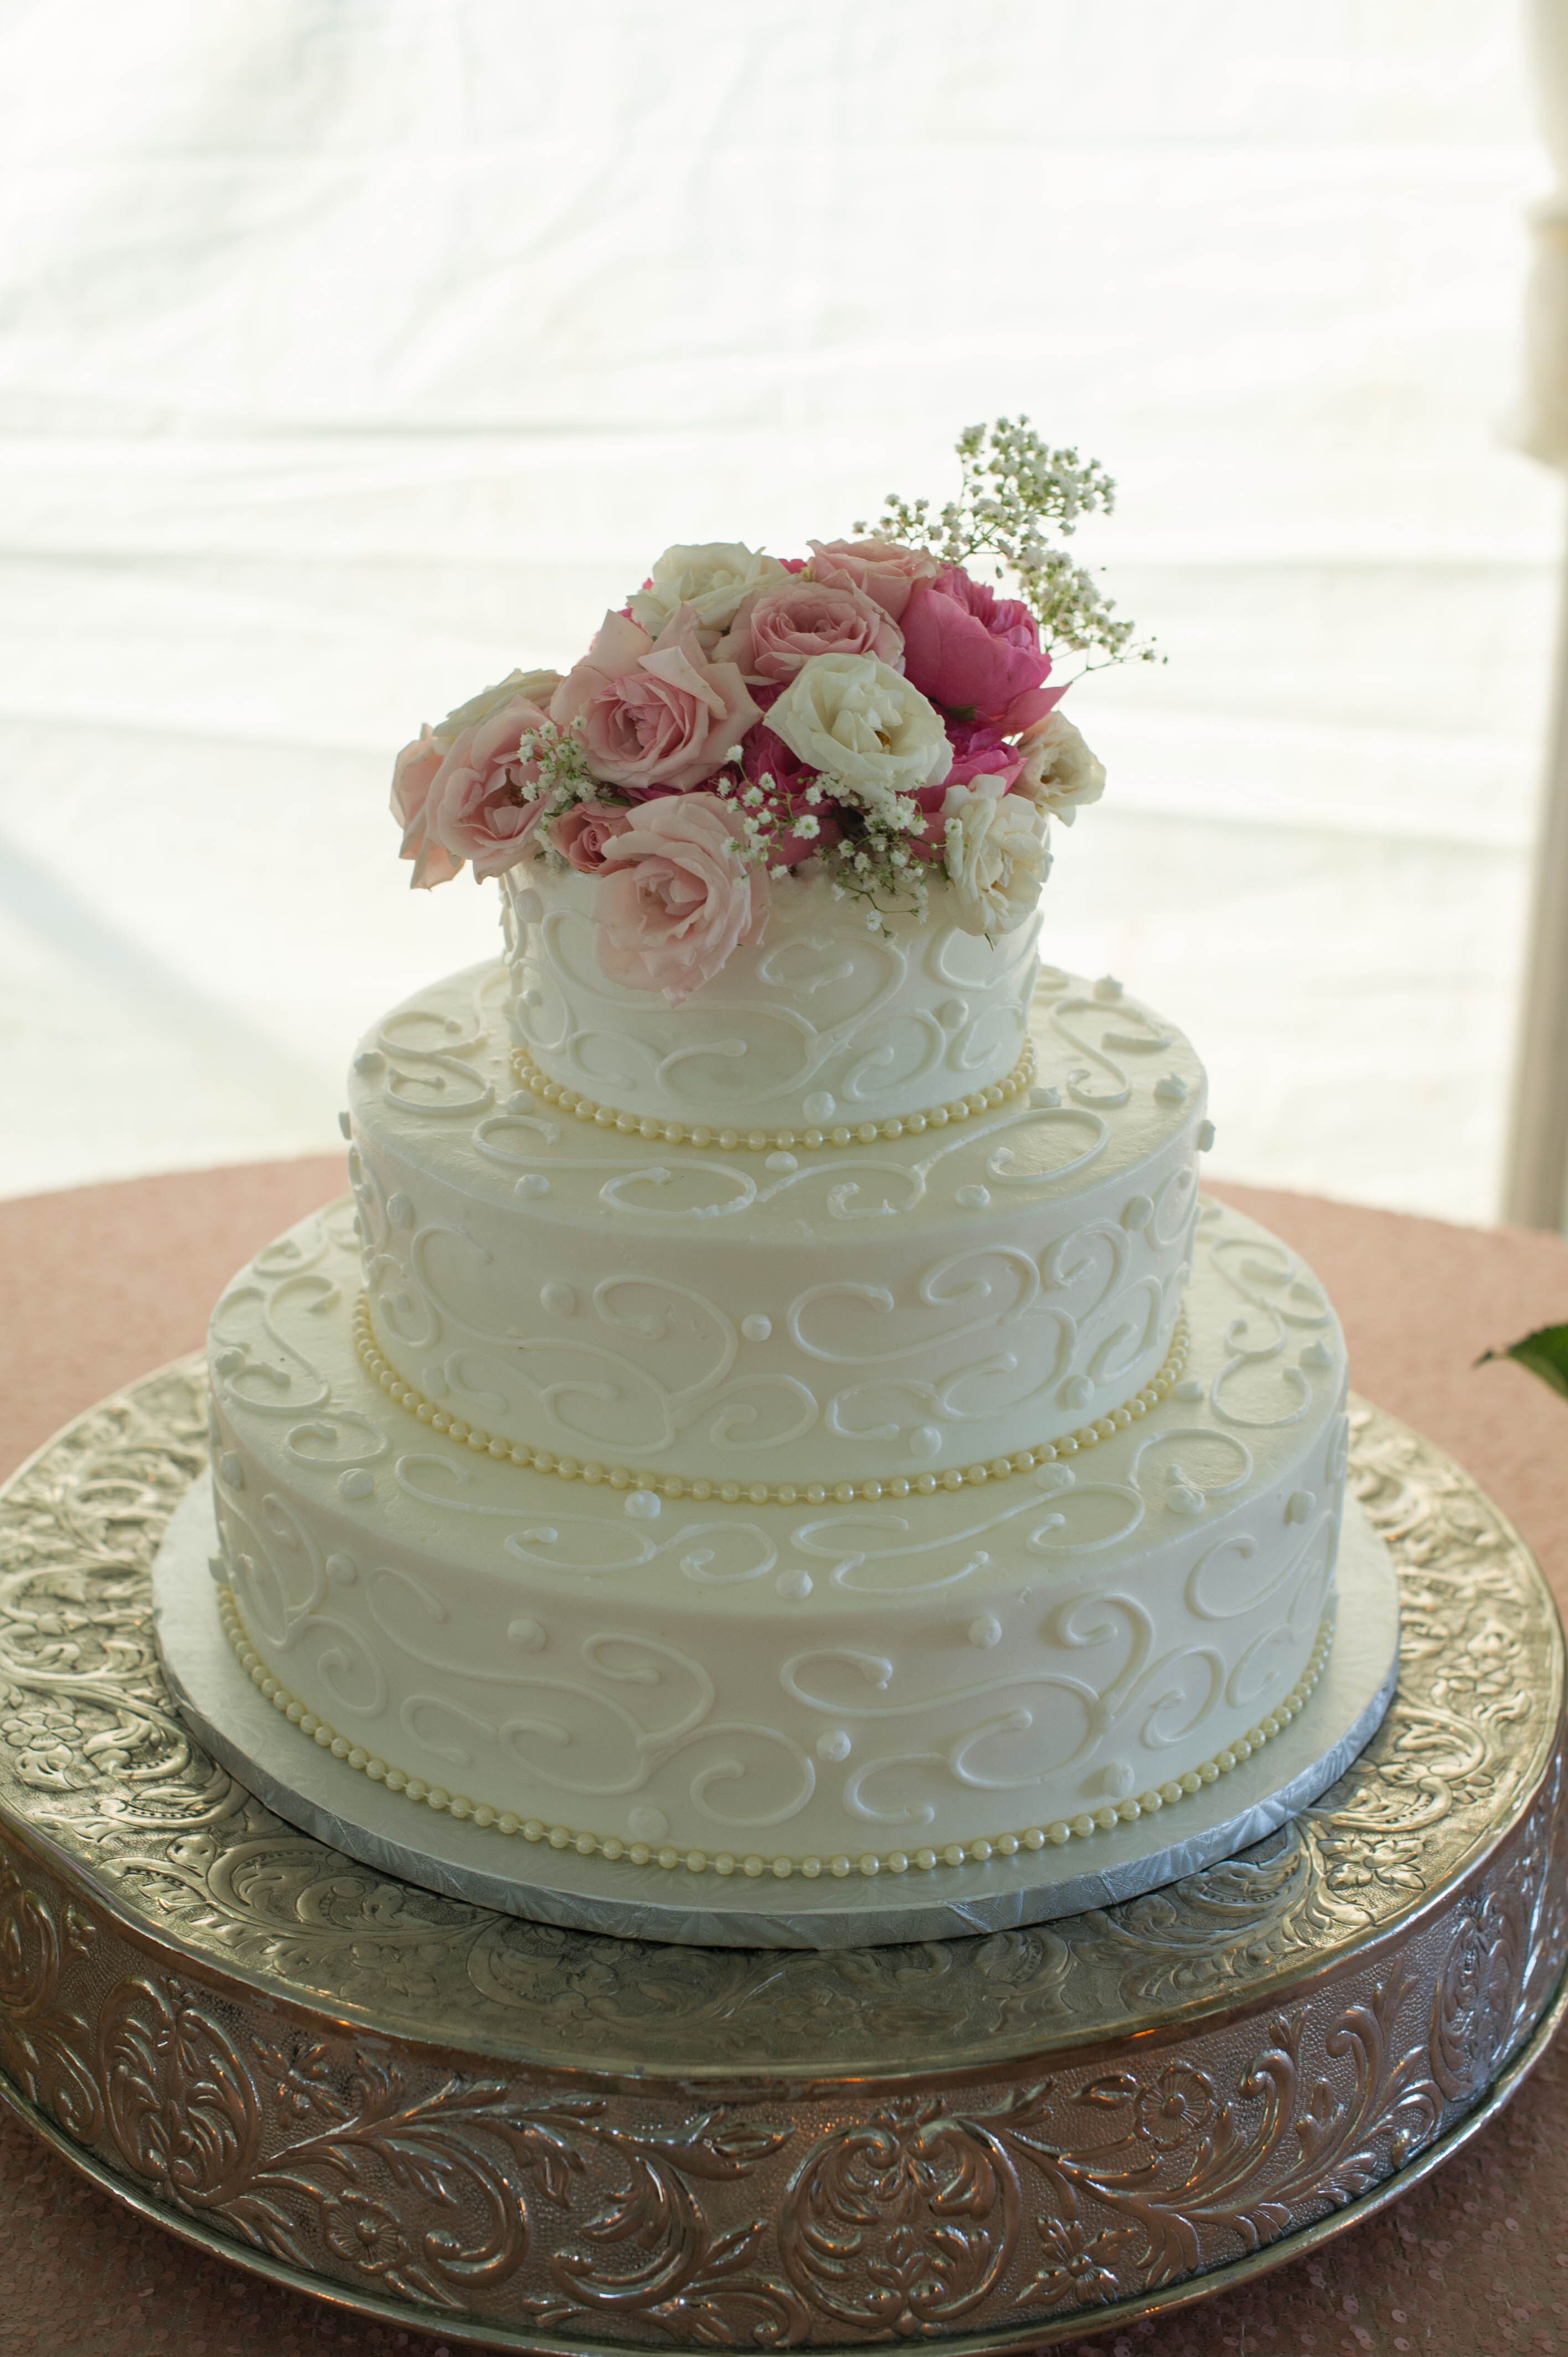 Traditional ThreeTiered Wedding Cake With Pink Roses